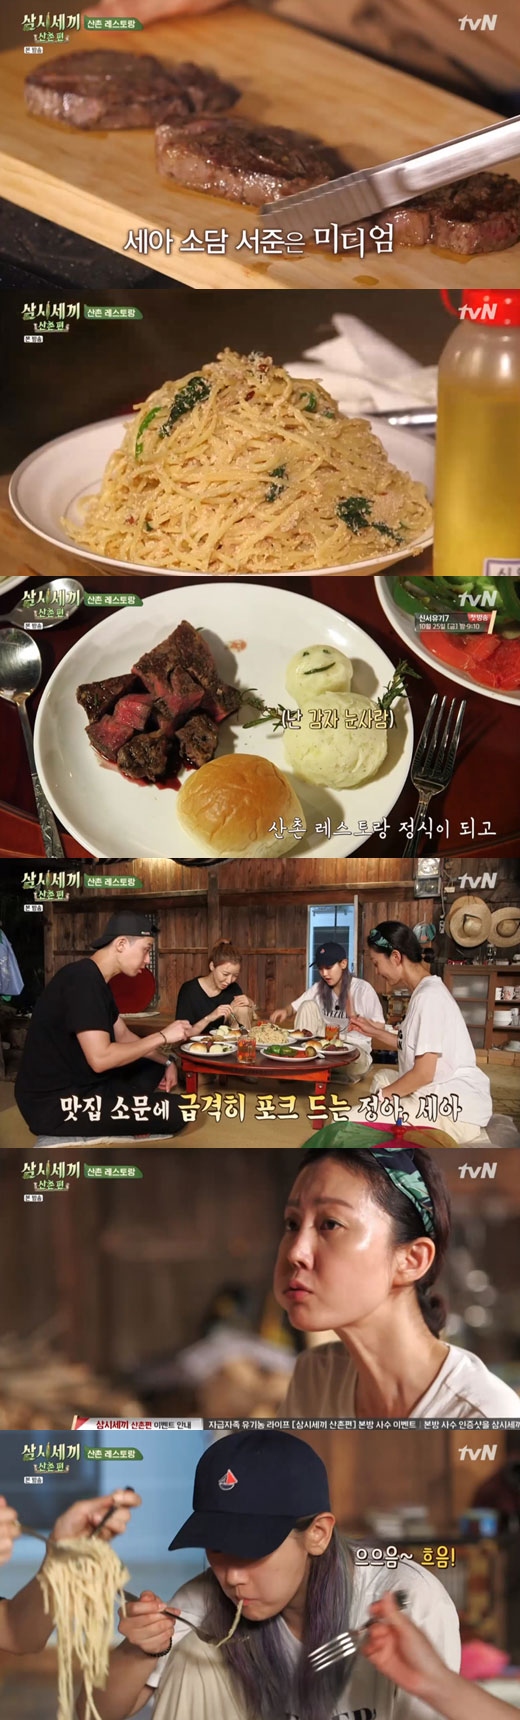 A restaurant was opened in the village of Samshi Sekisui, and a different food was followed.In the 10th cable channel tvN entertainment program Shishi Sekisui Mountain Village broadcasted on the 11th, Actor Yum Jung-ah, Yoon Se-ah, and Park So-dam were drawn with their fourth guest, Actor Park Seo-joon.On the day of the broadcast, four people decided to eat kimchi noodles as a lunch menu.When Yum Jung-ah was cutting kimchi to enter the noodles, Park Seo-joon came to Is there anything necessary? Yum Jung-ah asked him to put the kimchi in the refrigerator if you put it in.Then, when Yum Jung-ah asked, Did not you see the first chef who can not do this? Park Seo-joon gave a sensible answer saying, Knife is important or taste is important.The four people gathered on the table said, It is so delicious. The finished kimchi was eaten with noodles, and I was expecting to eat steak, which is a dinner menu made by Park Seo-joon.The family members of the mountain village then went to Mart to see the market; they bought kimbap laver for breakfast the next morning and wine juice, a steak substitute sauce, and then bought additional fish paste and ice cream.For a while, the men went out to see the neighborhood. After visiting the Miri mural village, they visited the bakery to buy bread for Pasta.After worrying about the bosss words that there was no baguette, I bought a morning bread.As evening approached, Yum Jung-ah tried to trade the production team; Yum Jung-ah said, Seo Jun-yi says he is good at Western cuisine.I asked if I could use it because I brought beef for steak to give us (cooking). When Na Young-seok asked, How much beef is expensive, how much do you bring? Park Seo-joon replied, I only brought enough to fill the boat.Eventually, Na Young-seok gave consideration to the guest brought it and I will give it special permission.Park Seo-joon opened a so-called Sanchon Restaurant, making not only steak but also blue pasta and mashed potato.In particular, Park Seo-joon laughed at the amount of enormous blue light Pasta, saying, Is not it a cooking bottle?Yoon Se-ah and Park So-dam, who were washing dishes after the storm food, expressed satisfaction that I really enjoyed this evening and I did not know how to eat steak and pasta here.The rain from the night continued until the next morning, and the four decided to make kimbap with breakfast menu.I took the kimbap ingredients such as cucumber, pepper, carrot, kimchi, egg, etc. out of the refrigerator and prepared Miri. Yoon Se-ah and Park So-dam picked sesame leaves and spinach.It was not until 12 oclock to the fish cake soup with Yum Jung-ah boiled that Kimbap was completed.The four people started eating quickly, and then there was talk of Yum Jung-ahs rope-skipping challenge.Yum Jung-ah had to go to Mart and make a jump rope to get the money to spend from the crew, and after practicing in the backyard with Park Seo-joons specialties, he headed to the crew.Na Young-seok asked Yum Jung-ah for a high difficulty, saying, We set 12 goals yesterday; we have to target 16 after a day.With tensions in the air, Yum Jung-ah succeeded in 16 jump ropes at once and earned 10,000 won for the production team.After that, four people decided to go to the market with joy, and Yum Jung-ah said, I was worried for two days, and I was so worried that I was so sorry.